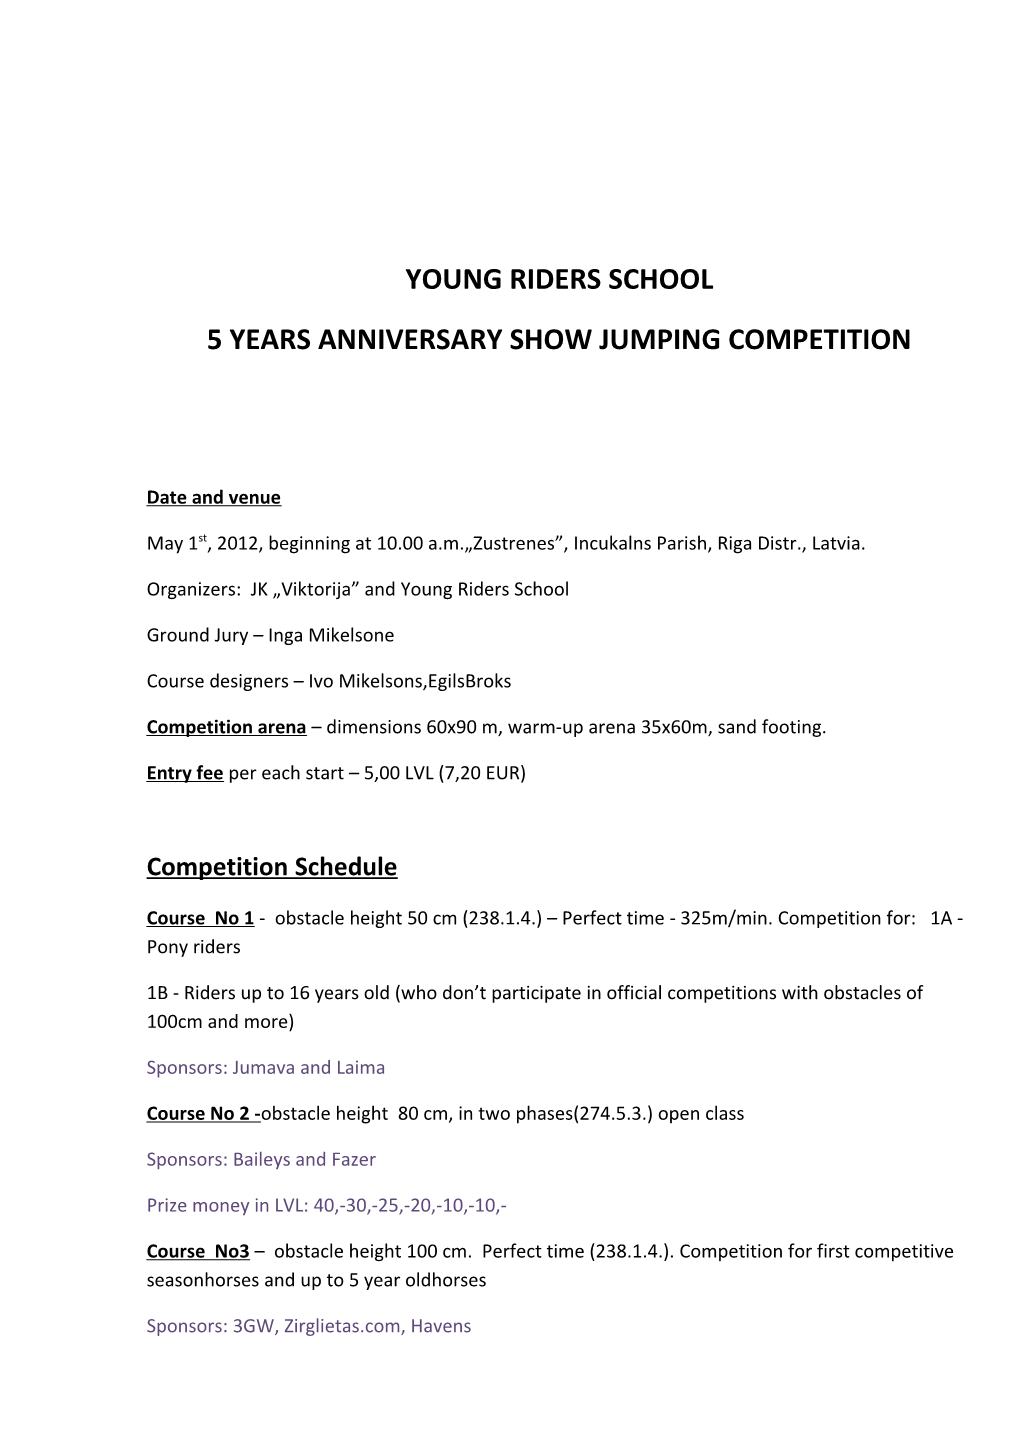 5 Years Anniversary Show Jumping Competition